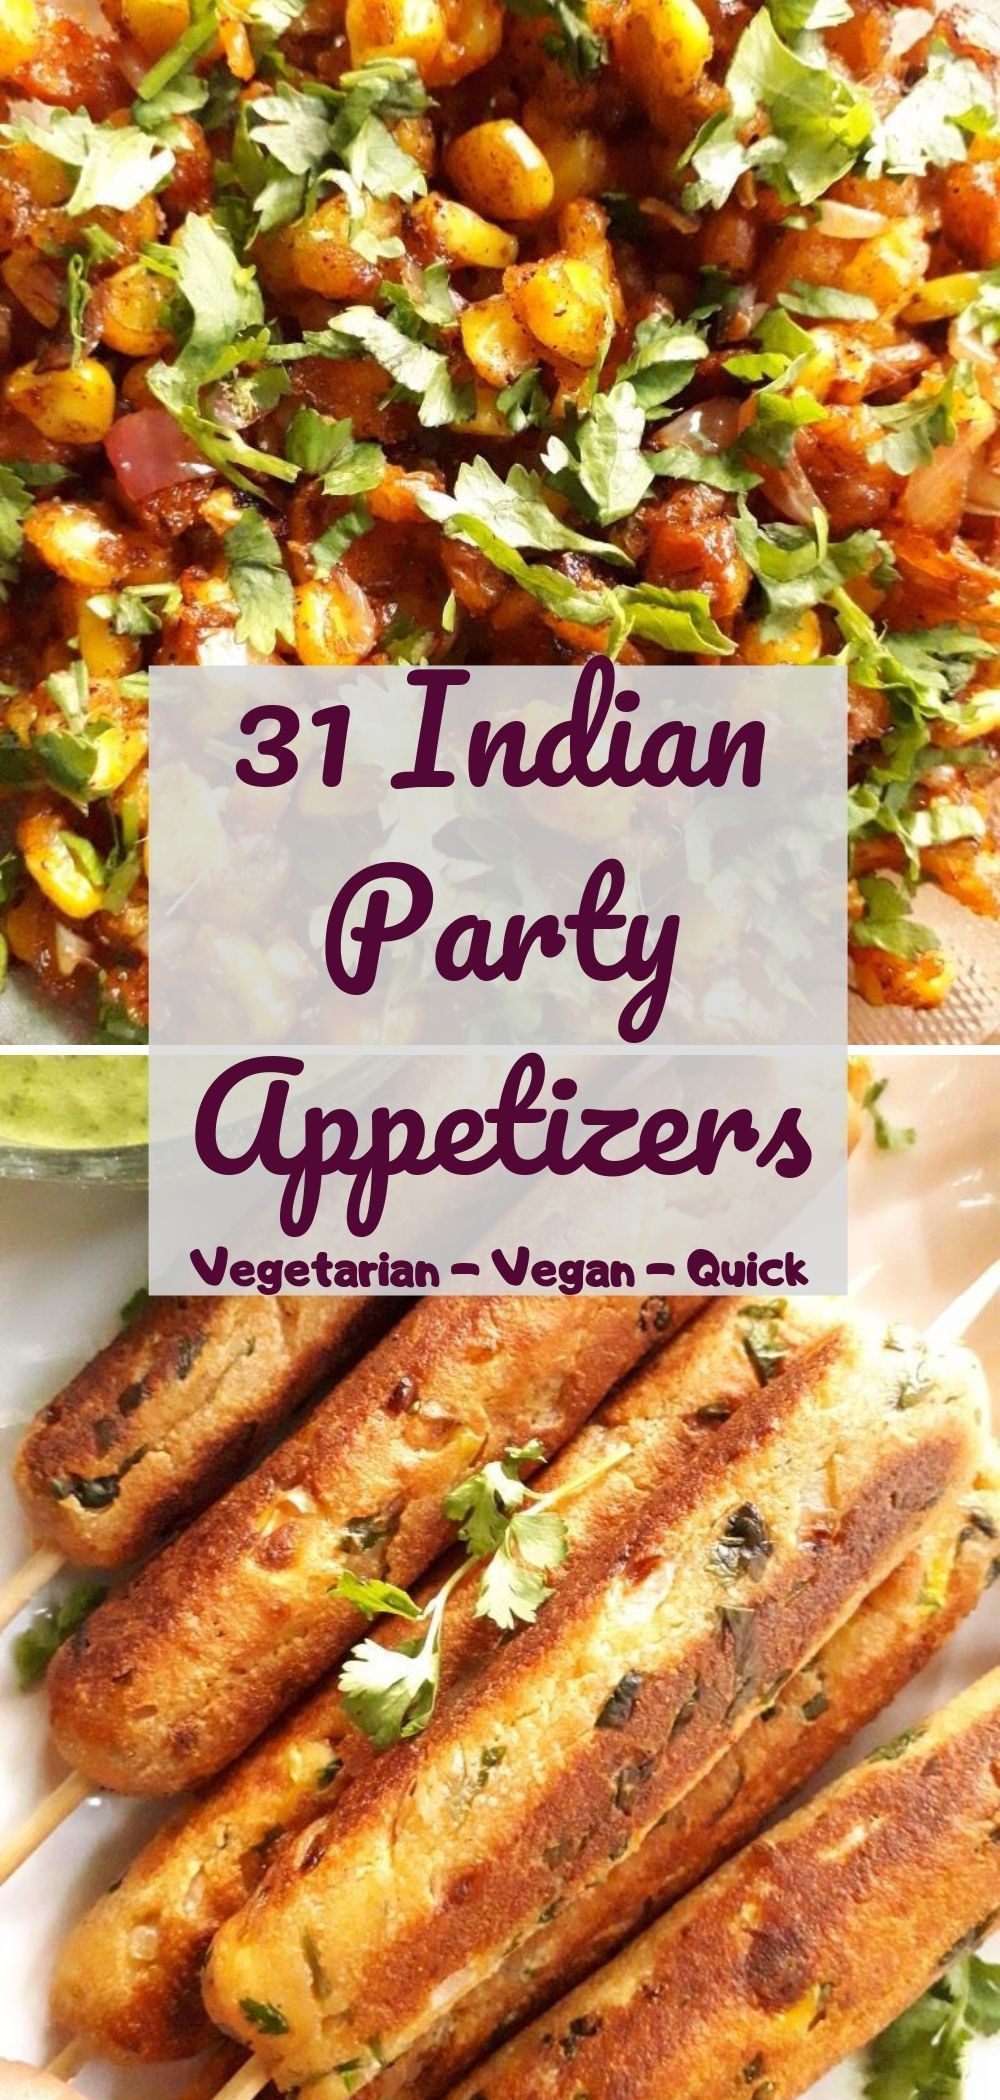 Indian Vegetarian Appetizers
 Get recipes of 31 Quick & easy Indian party appetizers